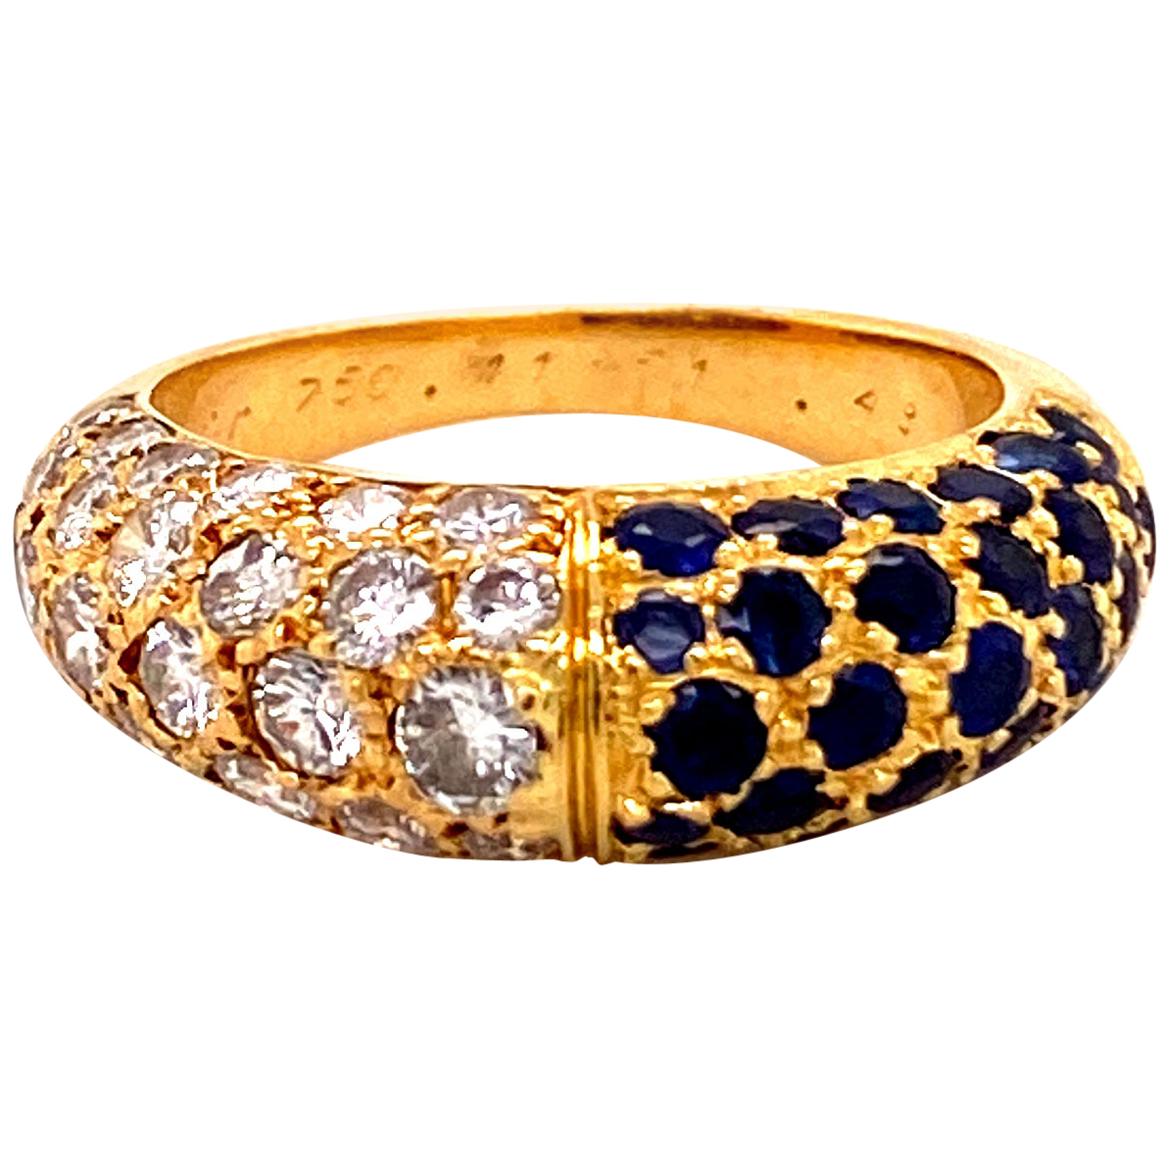 Cartier Sapphire and Diamond Ring in 18 Karat Yellow Gold